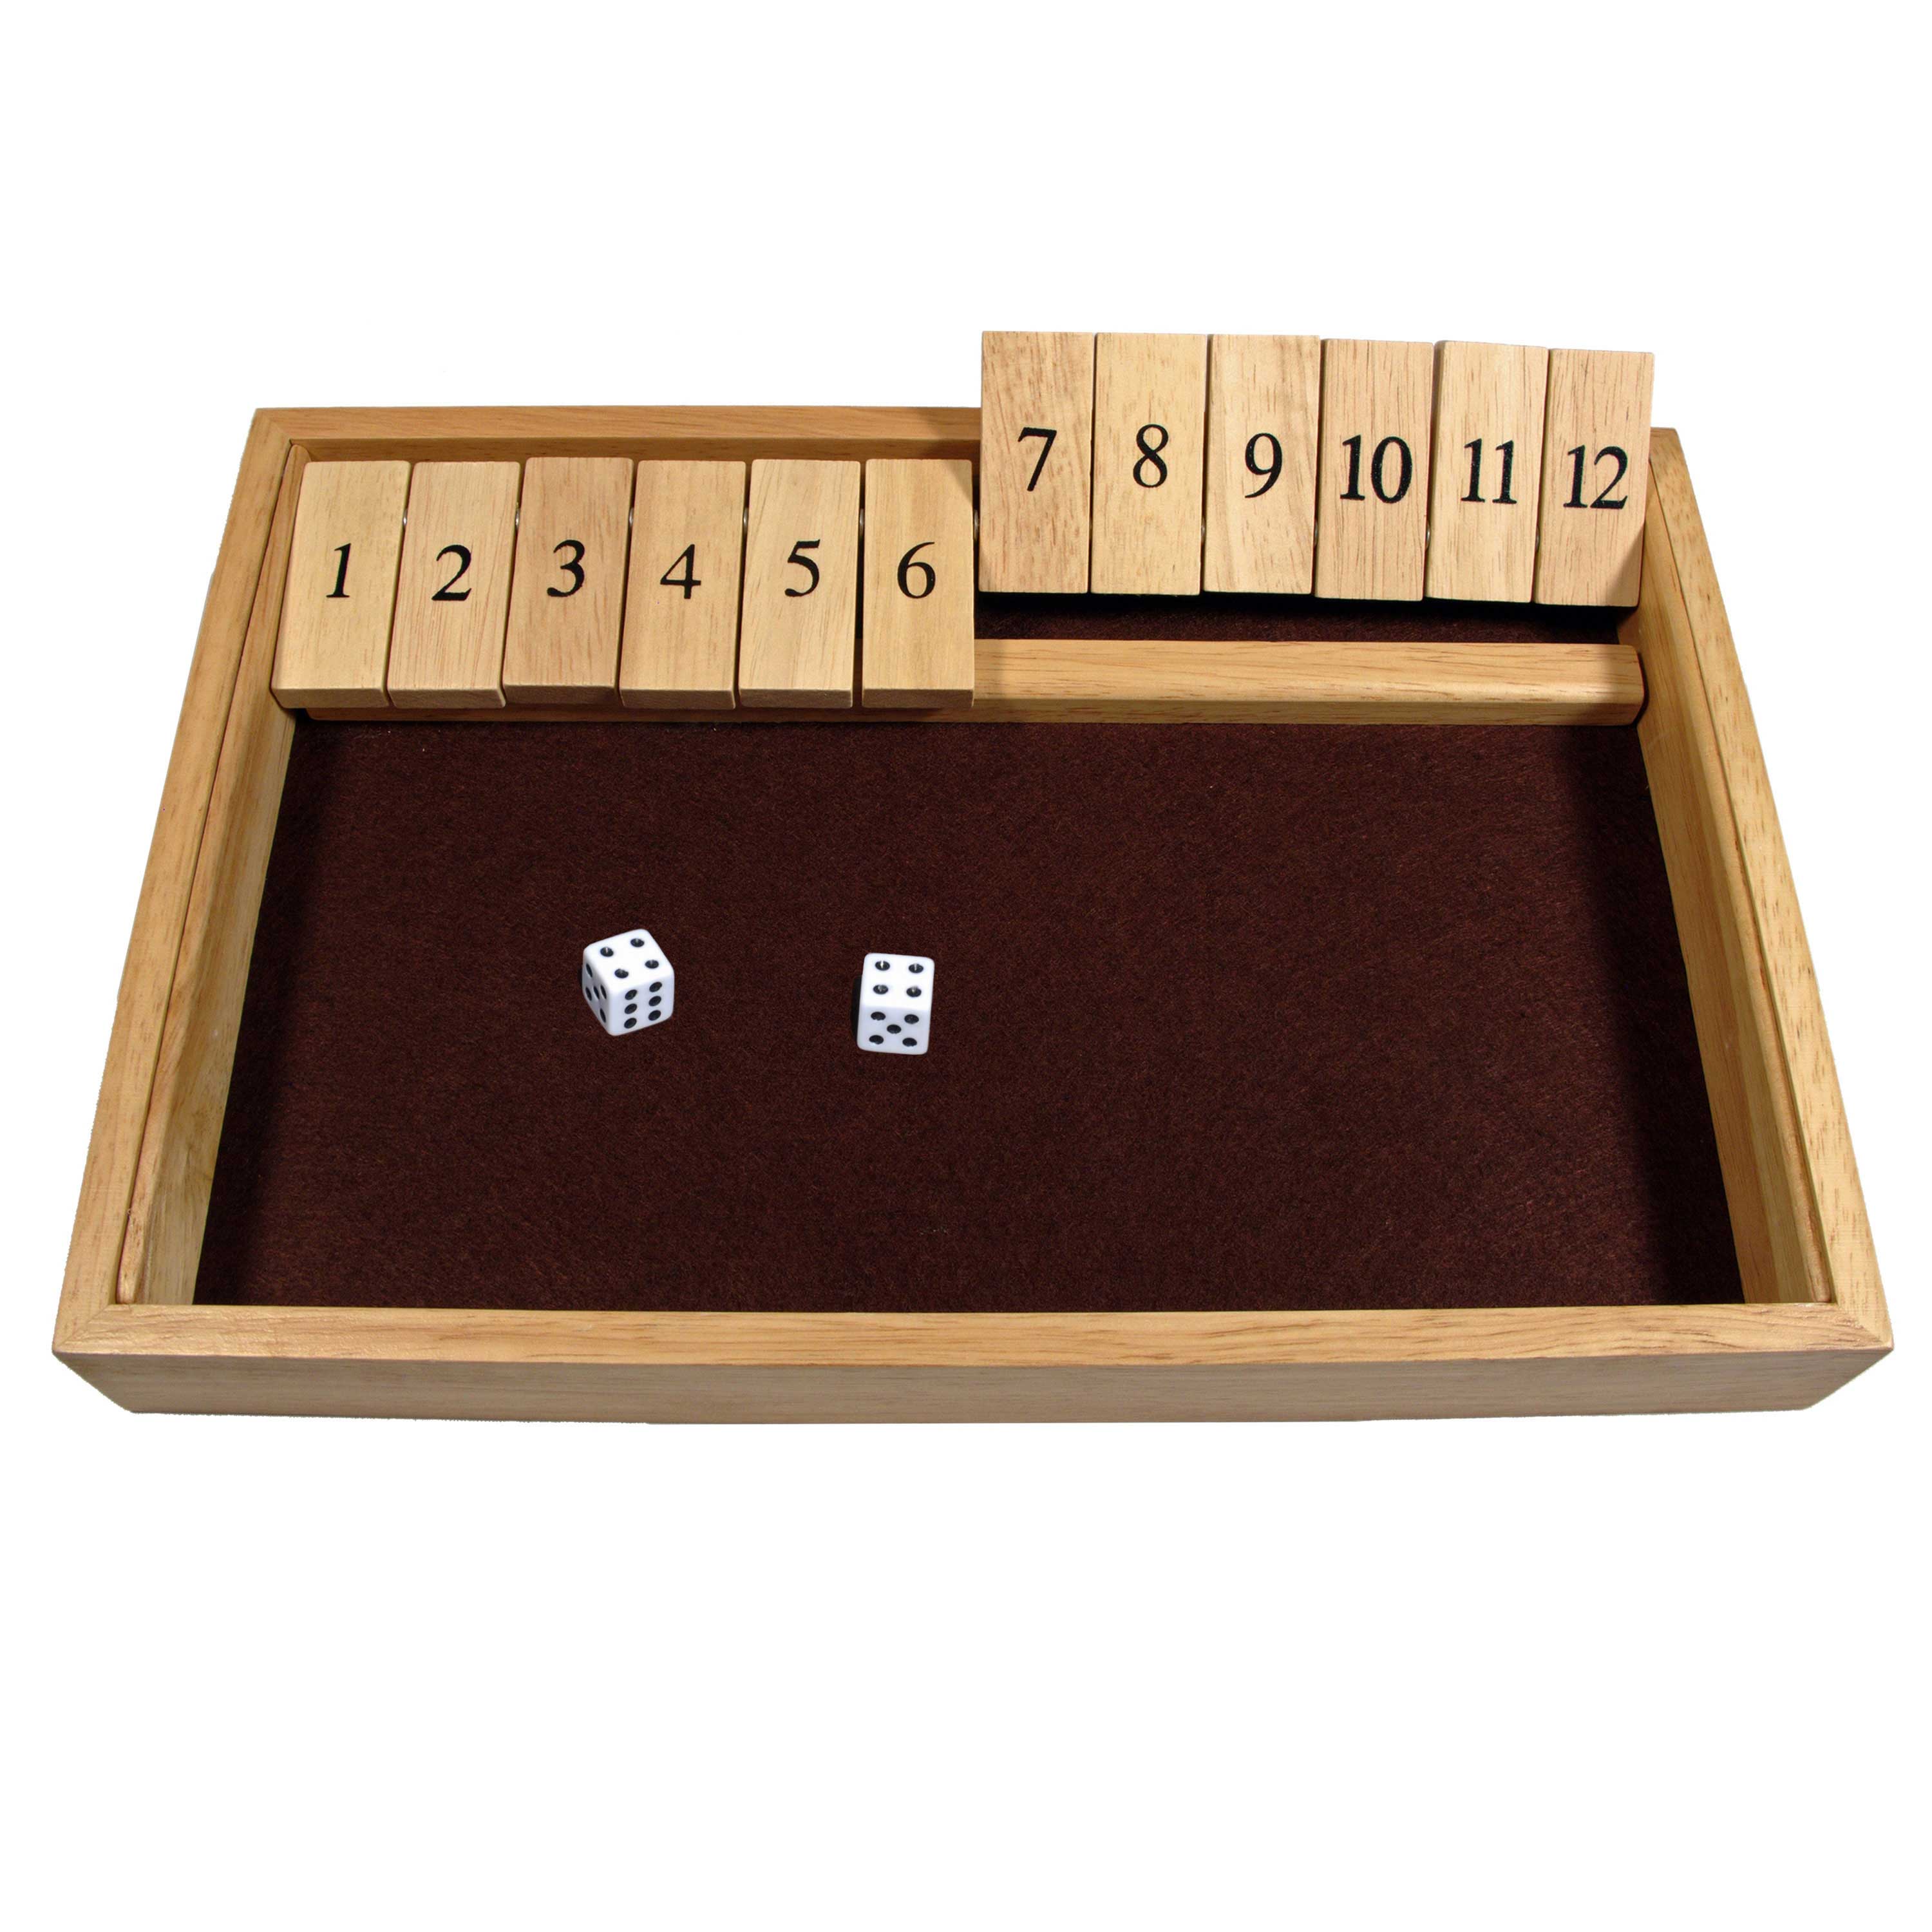 TRAVEL GAME DOUBLING DICE BACKGAMMON SET LARGE WOODEN BOARD 